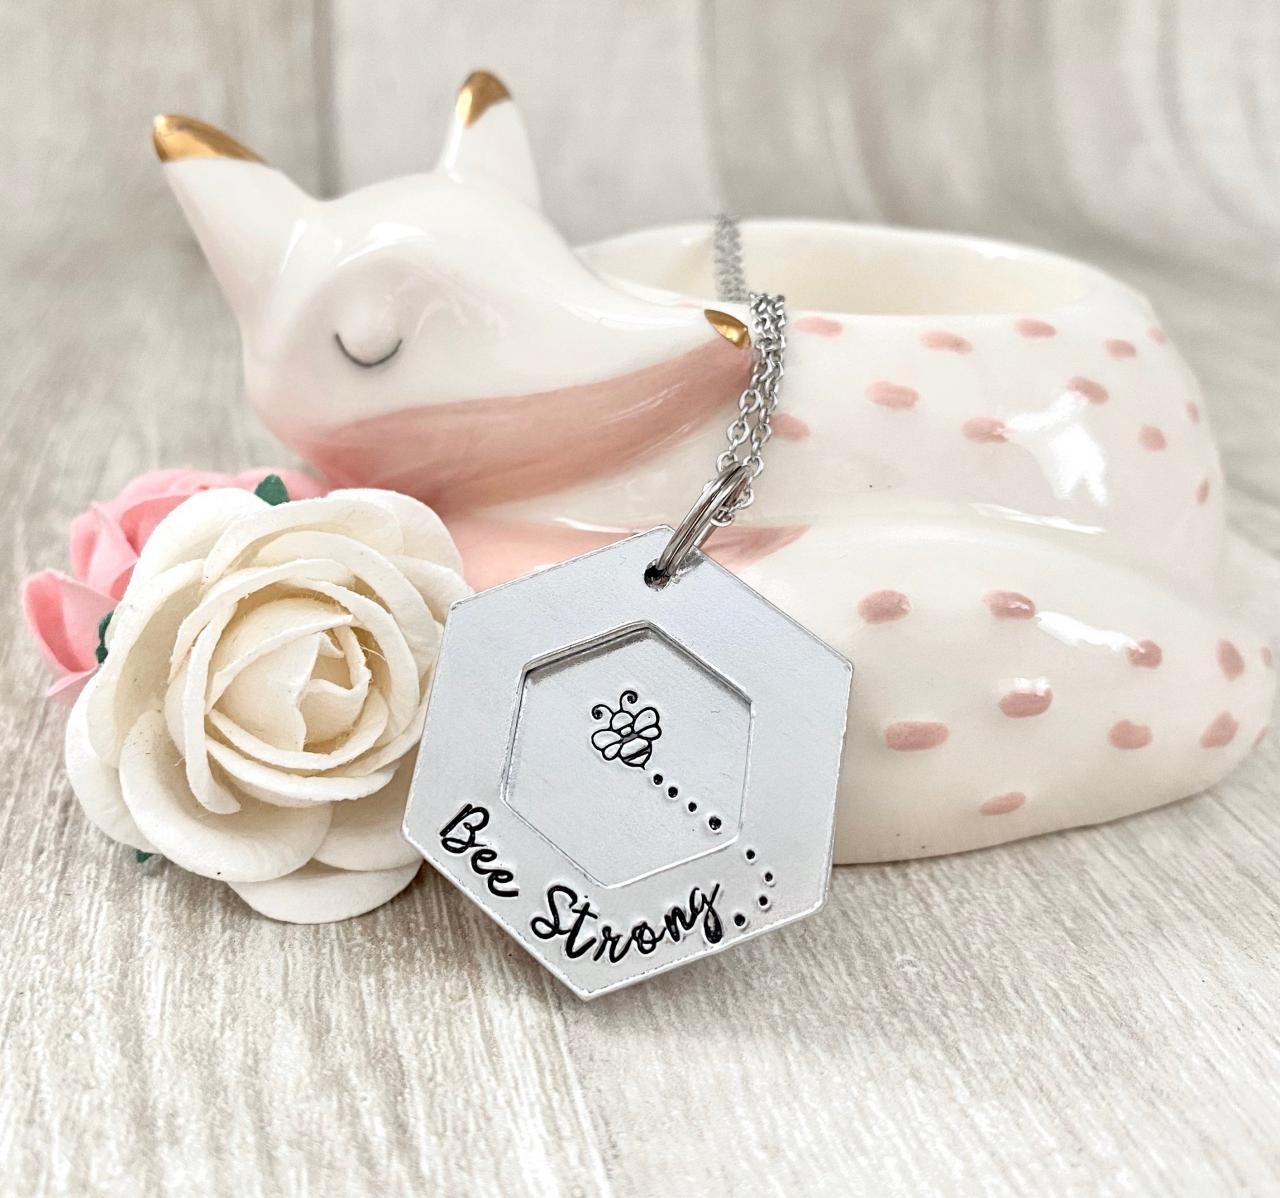 Bee Strong, Bee Necklace, Handstamped Jewellery, Be Yourself, Happy, Kind.